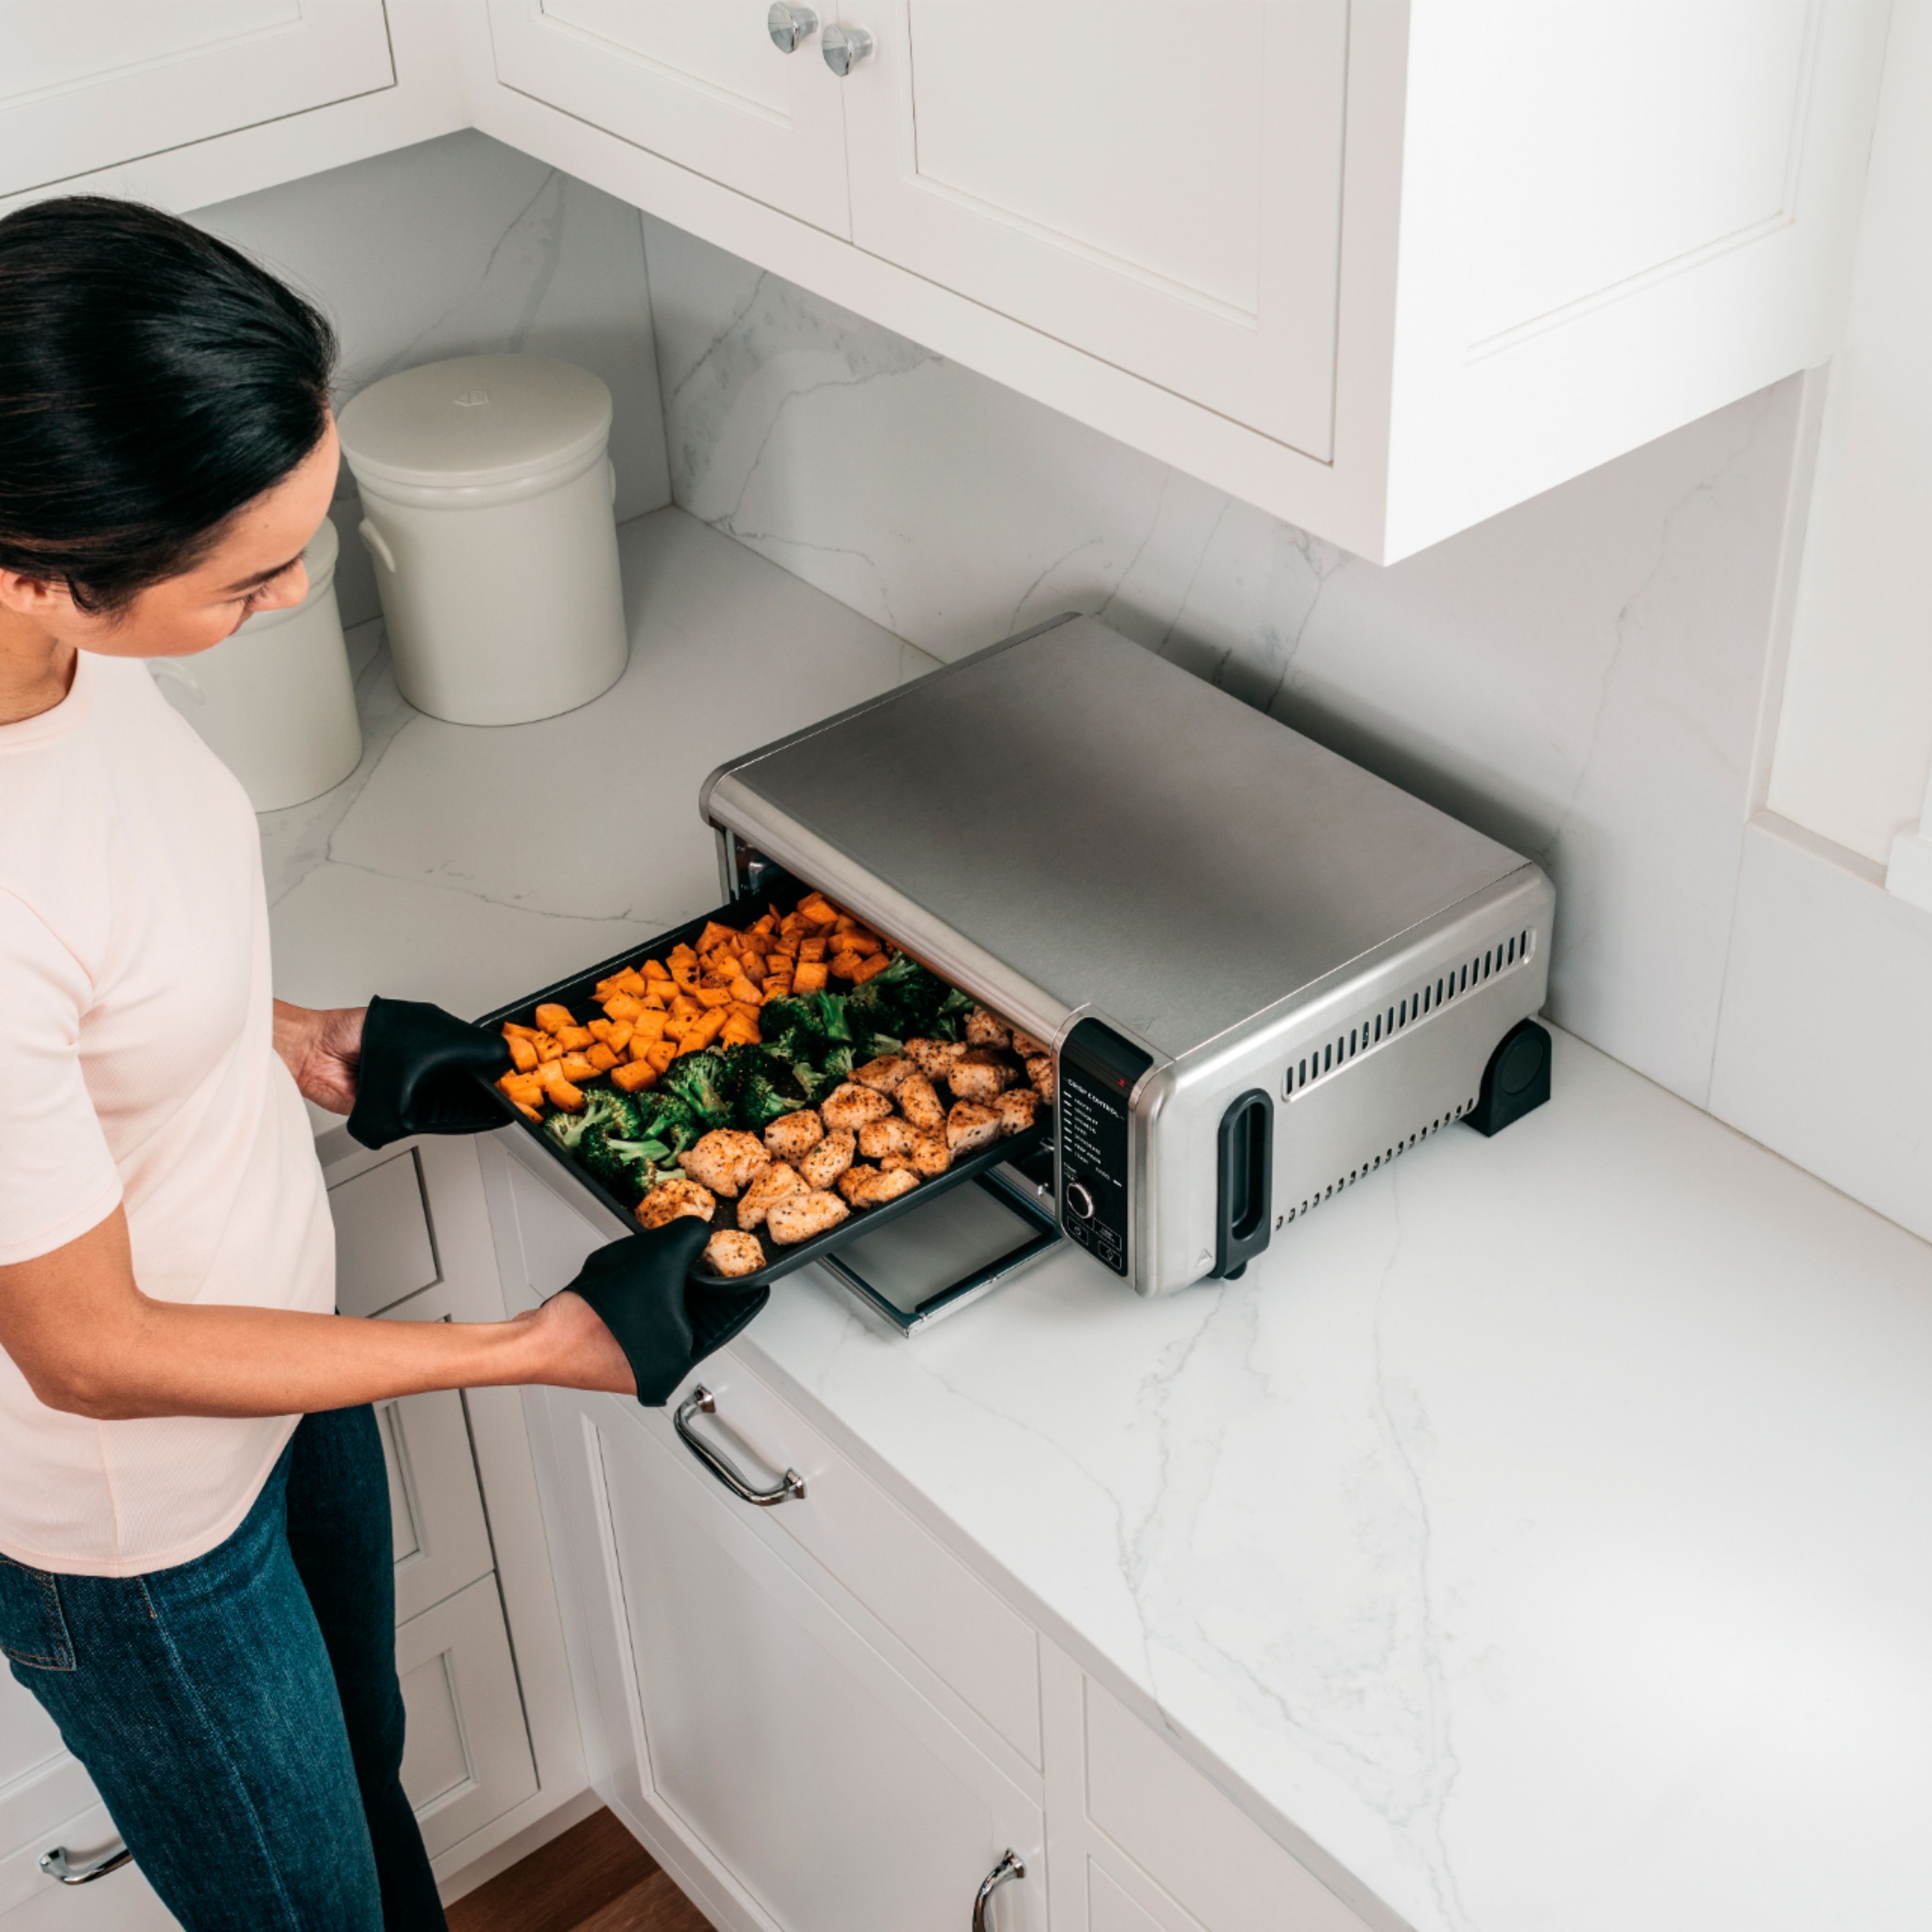 Recipes For Ninja Digital Air Fryer Oven to Create Supper Tonight